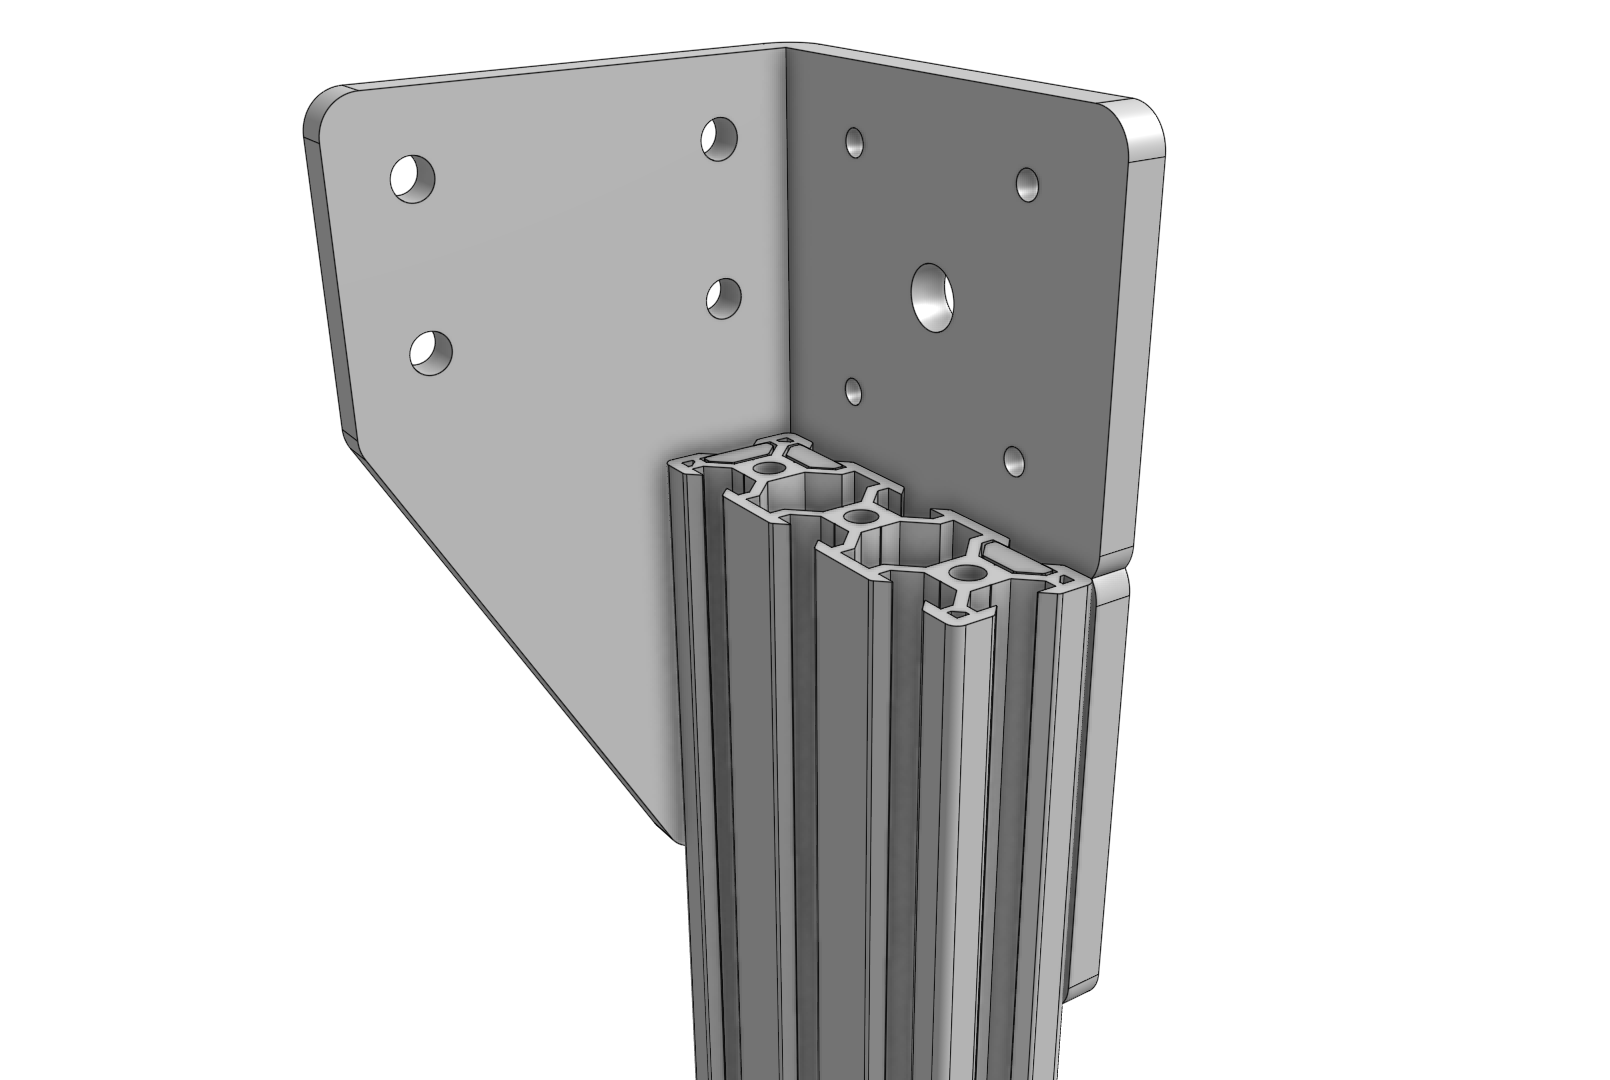 Align the top of the extrusion with the bracket notch